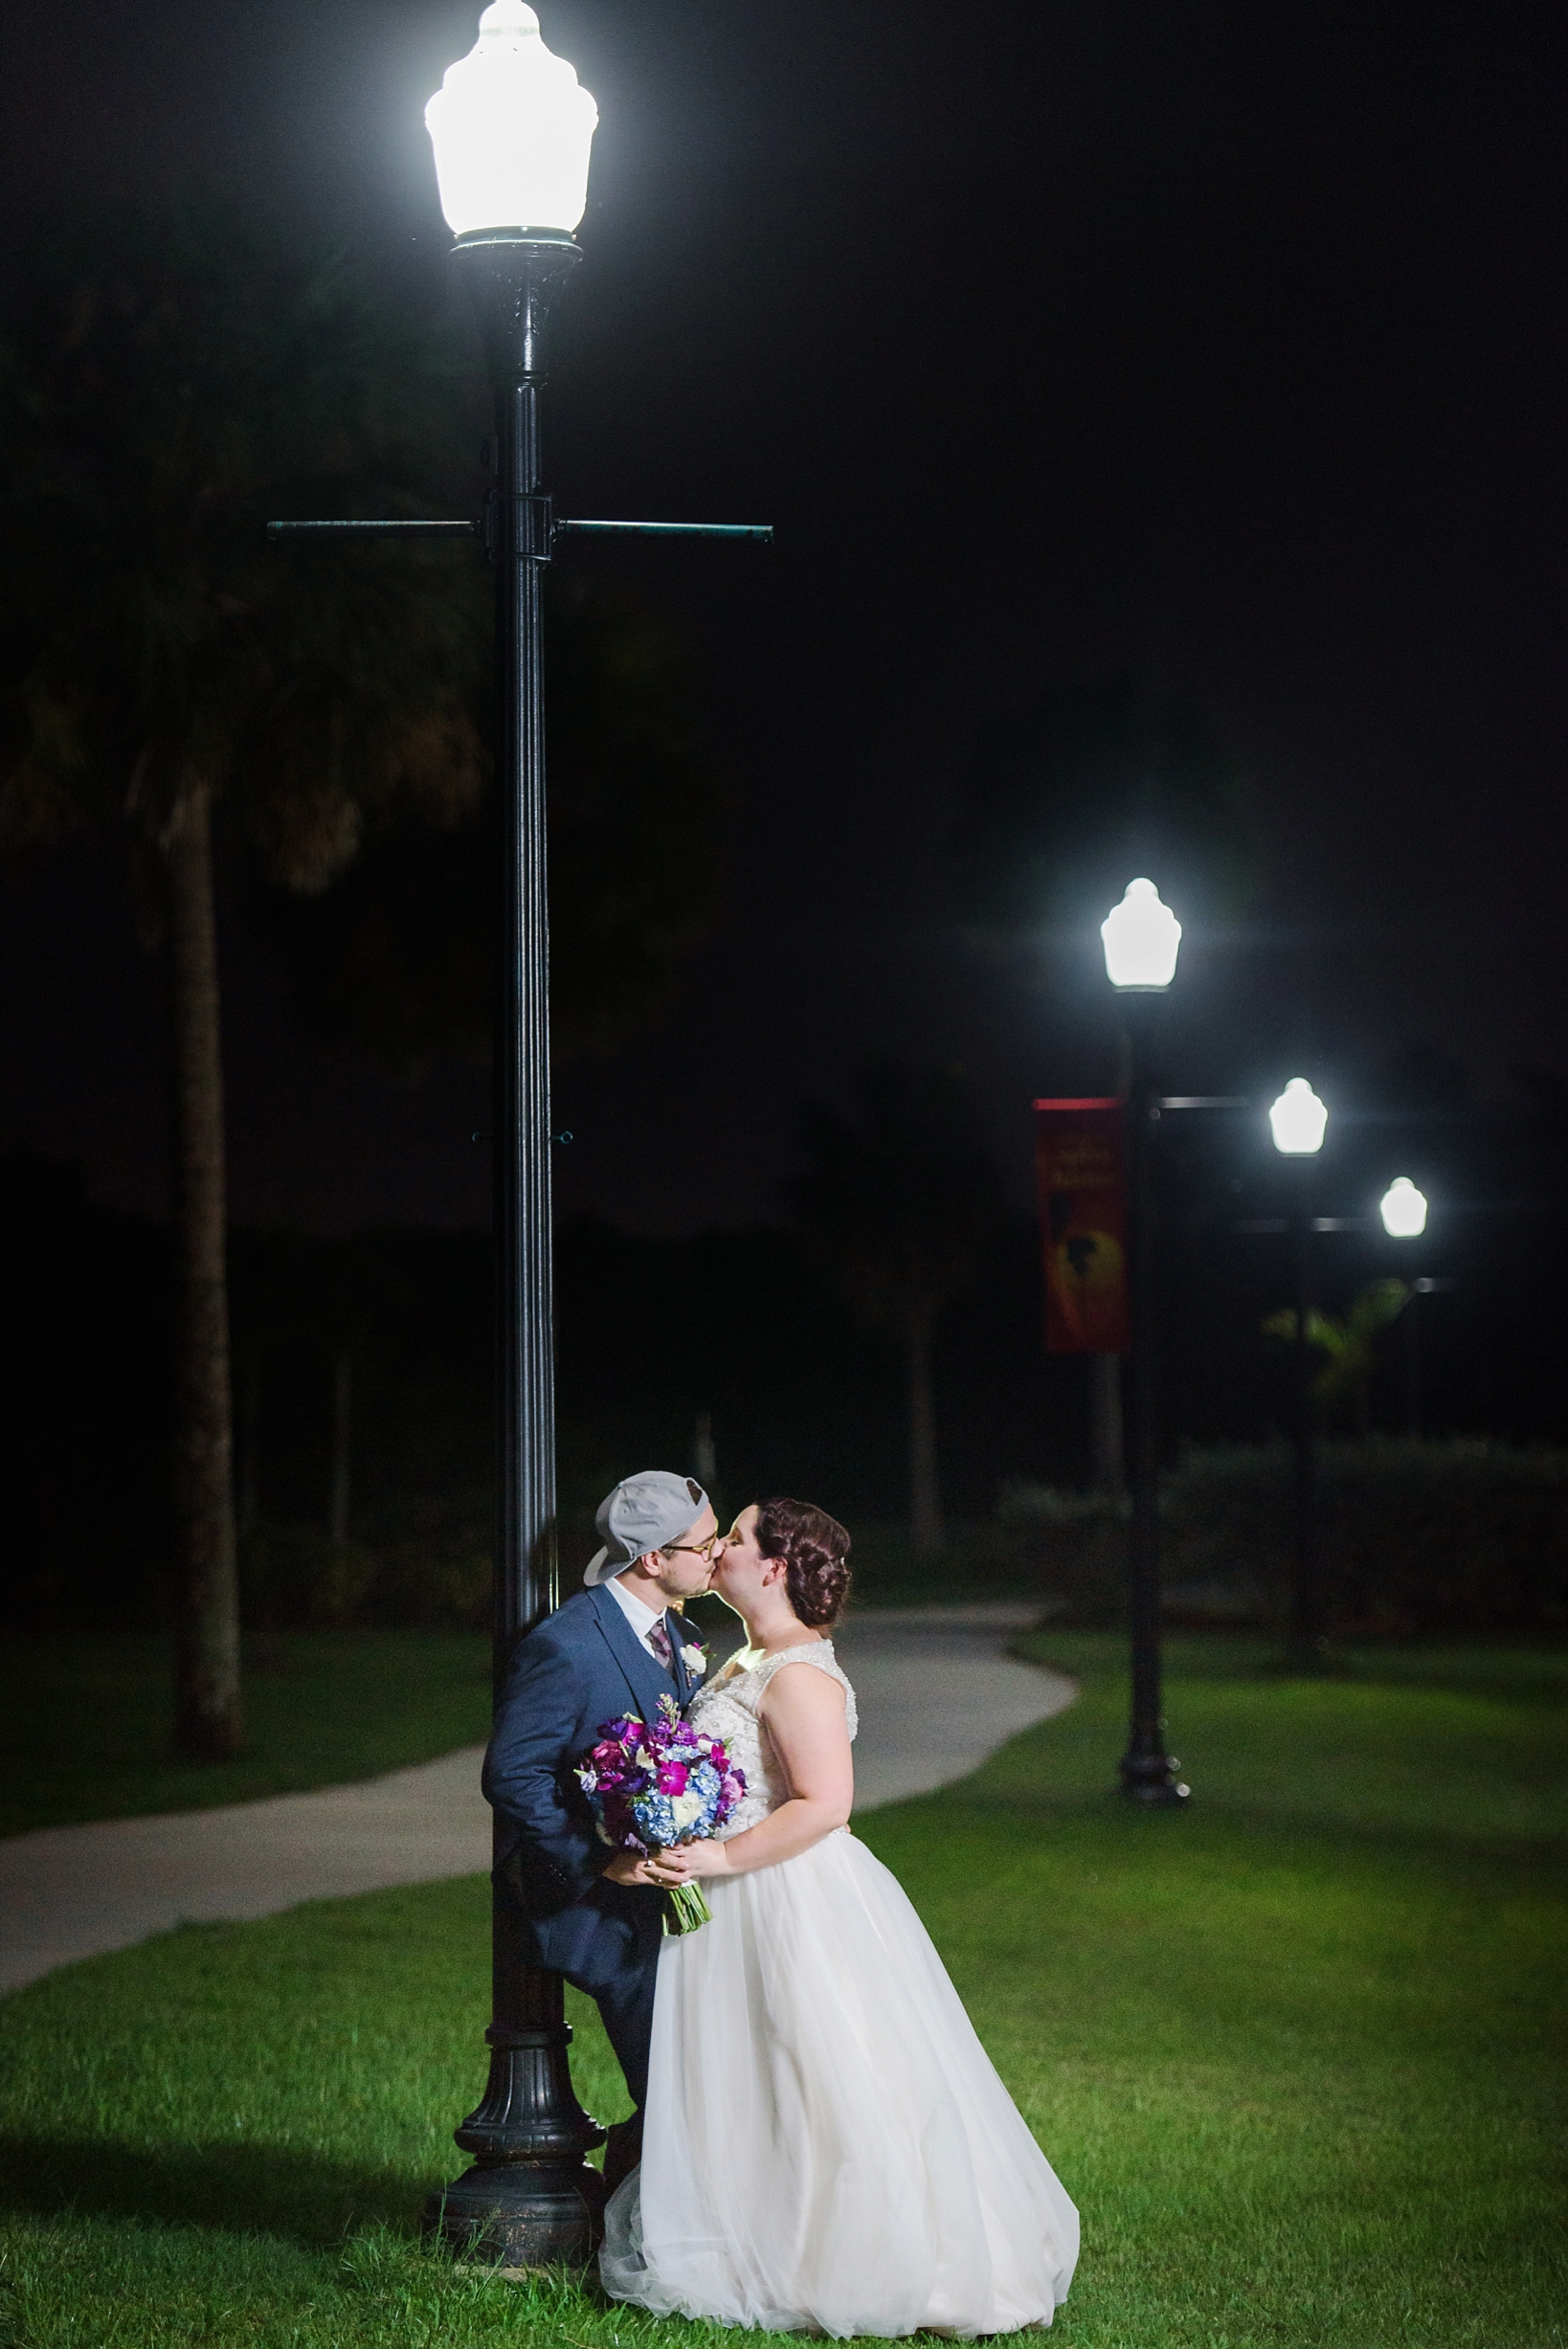 Bride and Groom slipped outside for some night photography by the street lamps by Sarah & Ben Photography